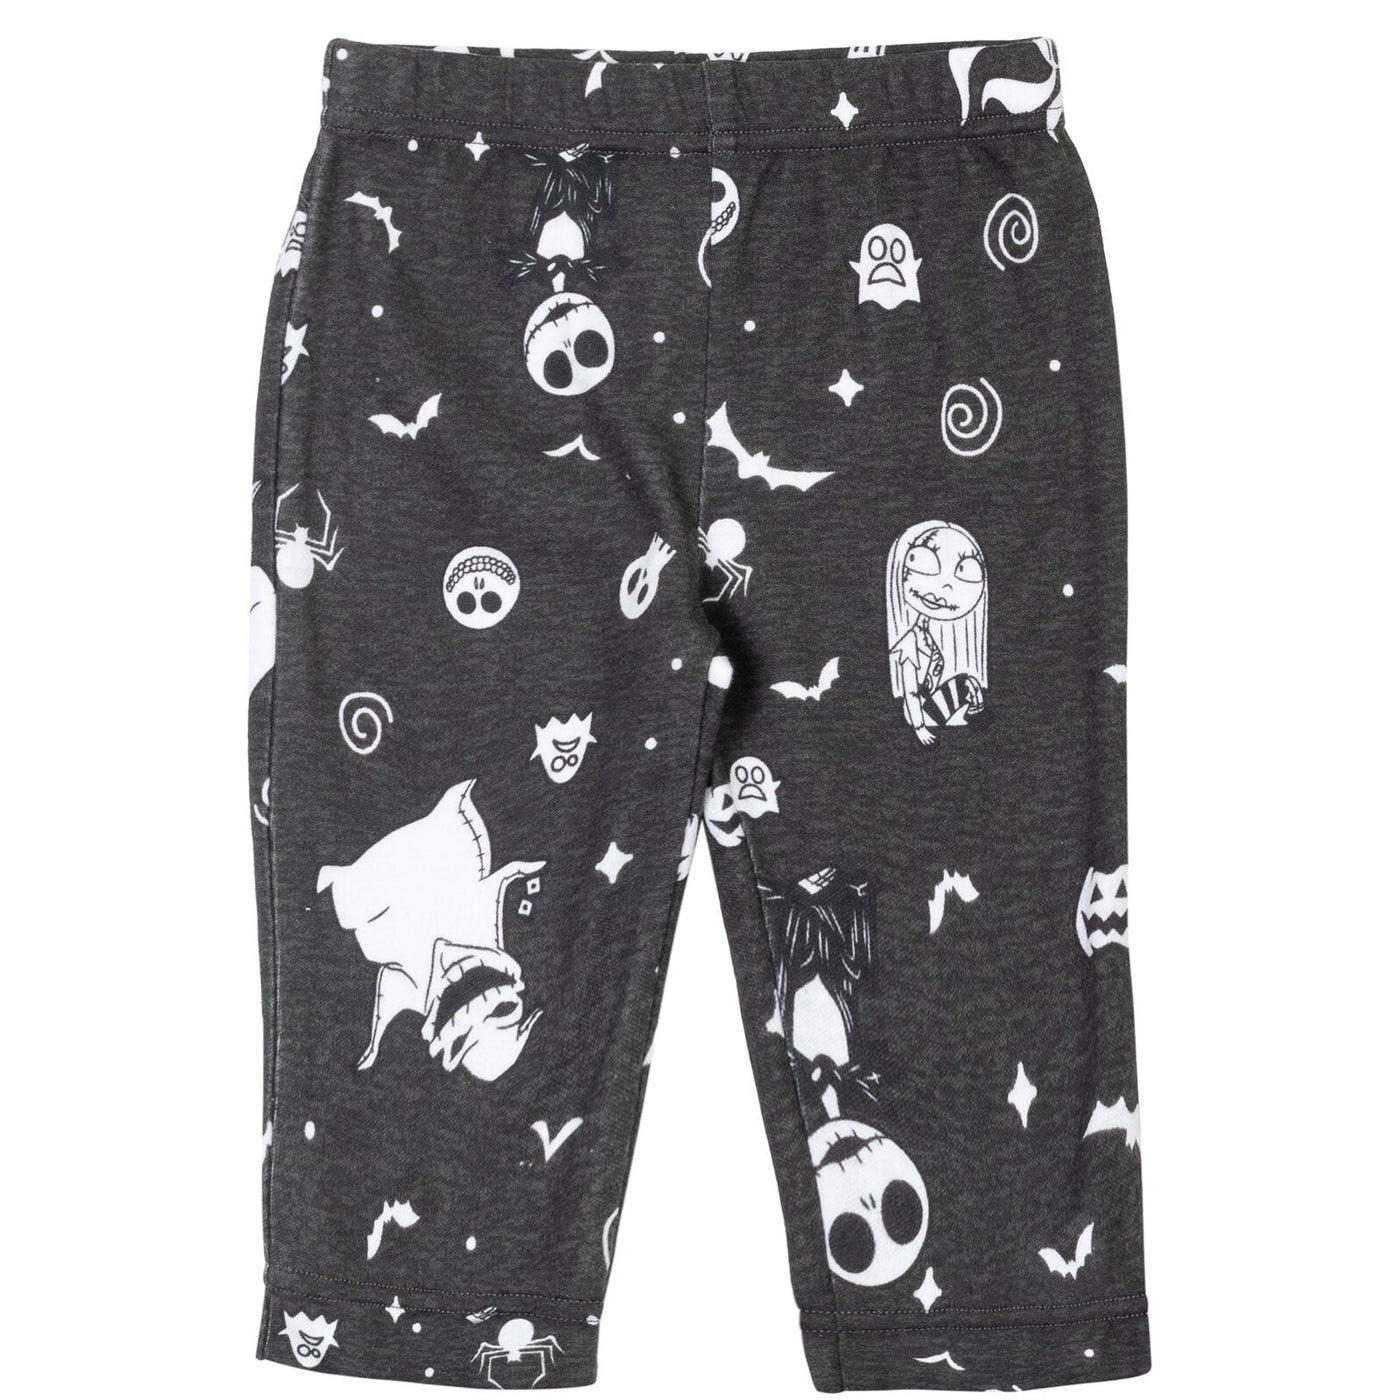 Disney Nightmare Before Christmas Bodysuit Pants and Hat 3 Piece Outfit Set - imagikids